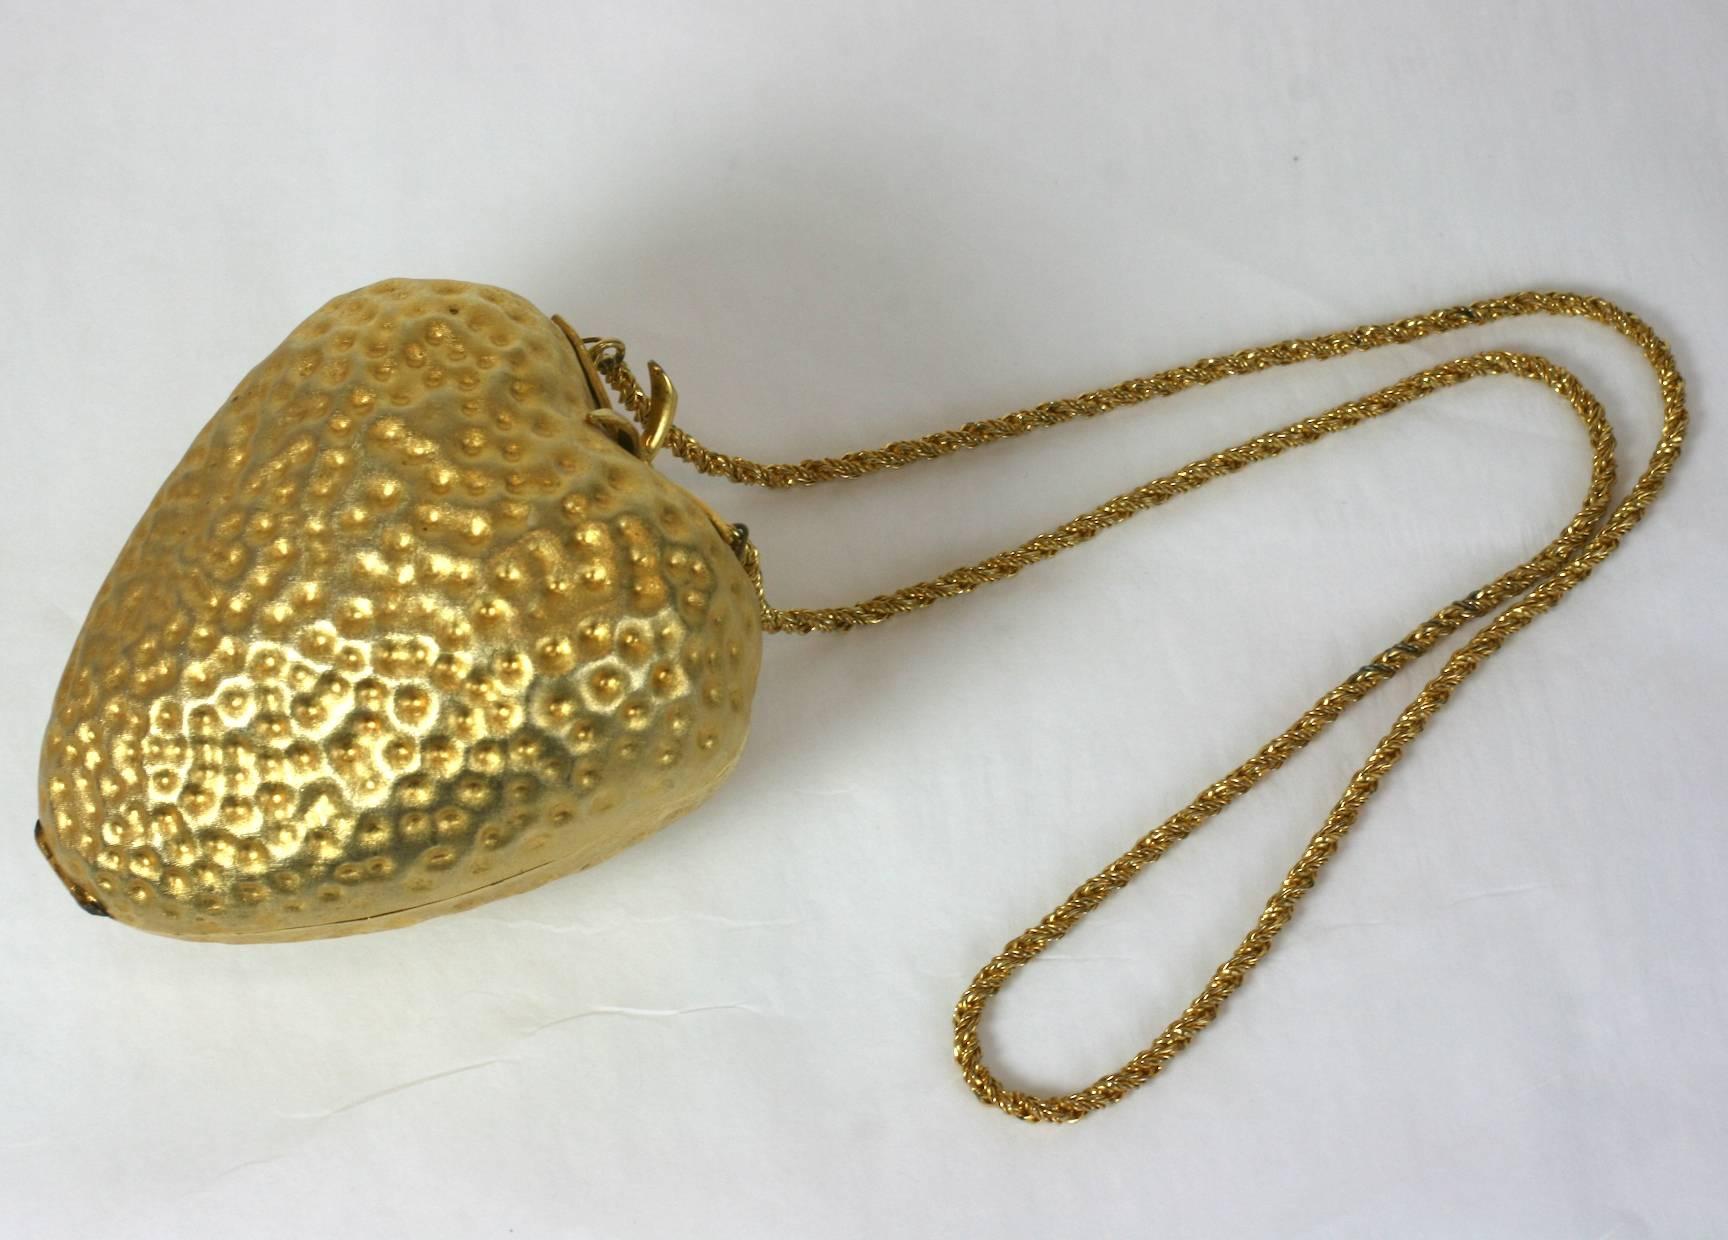 Gilt Italian Strawberry Purse. Charming figural shoulder bag in the shape of a 3D gilt strawberry. Felt lined. Italy 1980's. Excellent condition. 